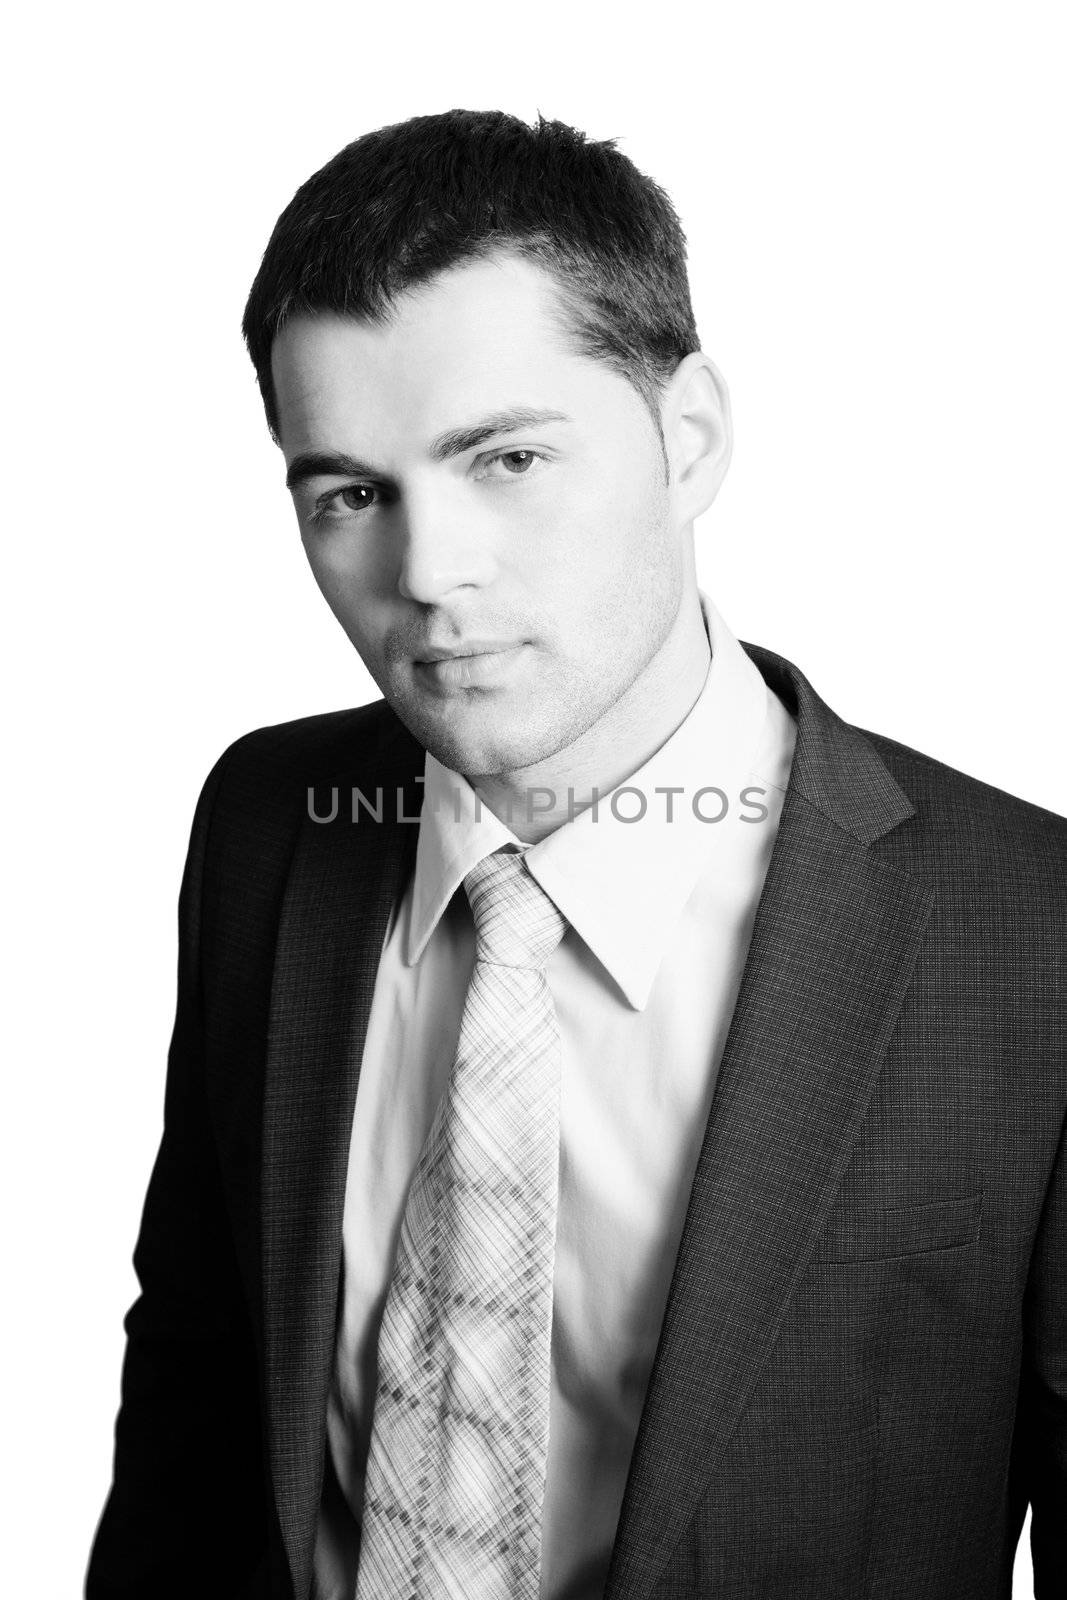 Portrait of Young man wearing suit with tie